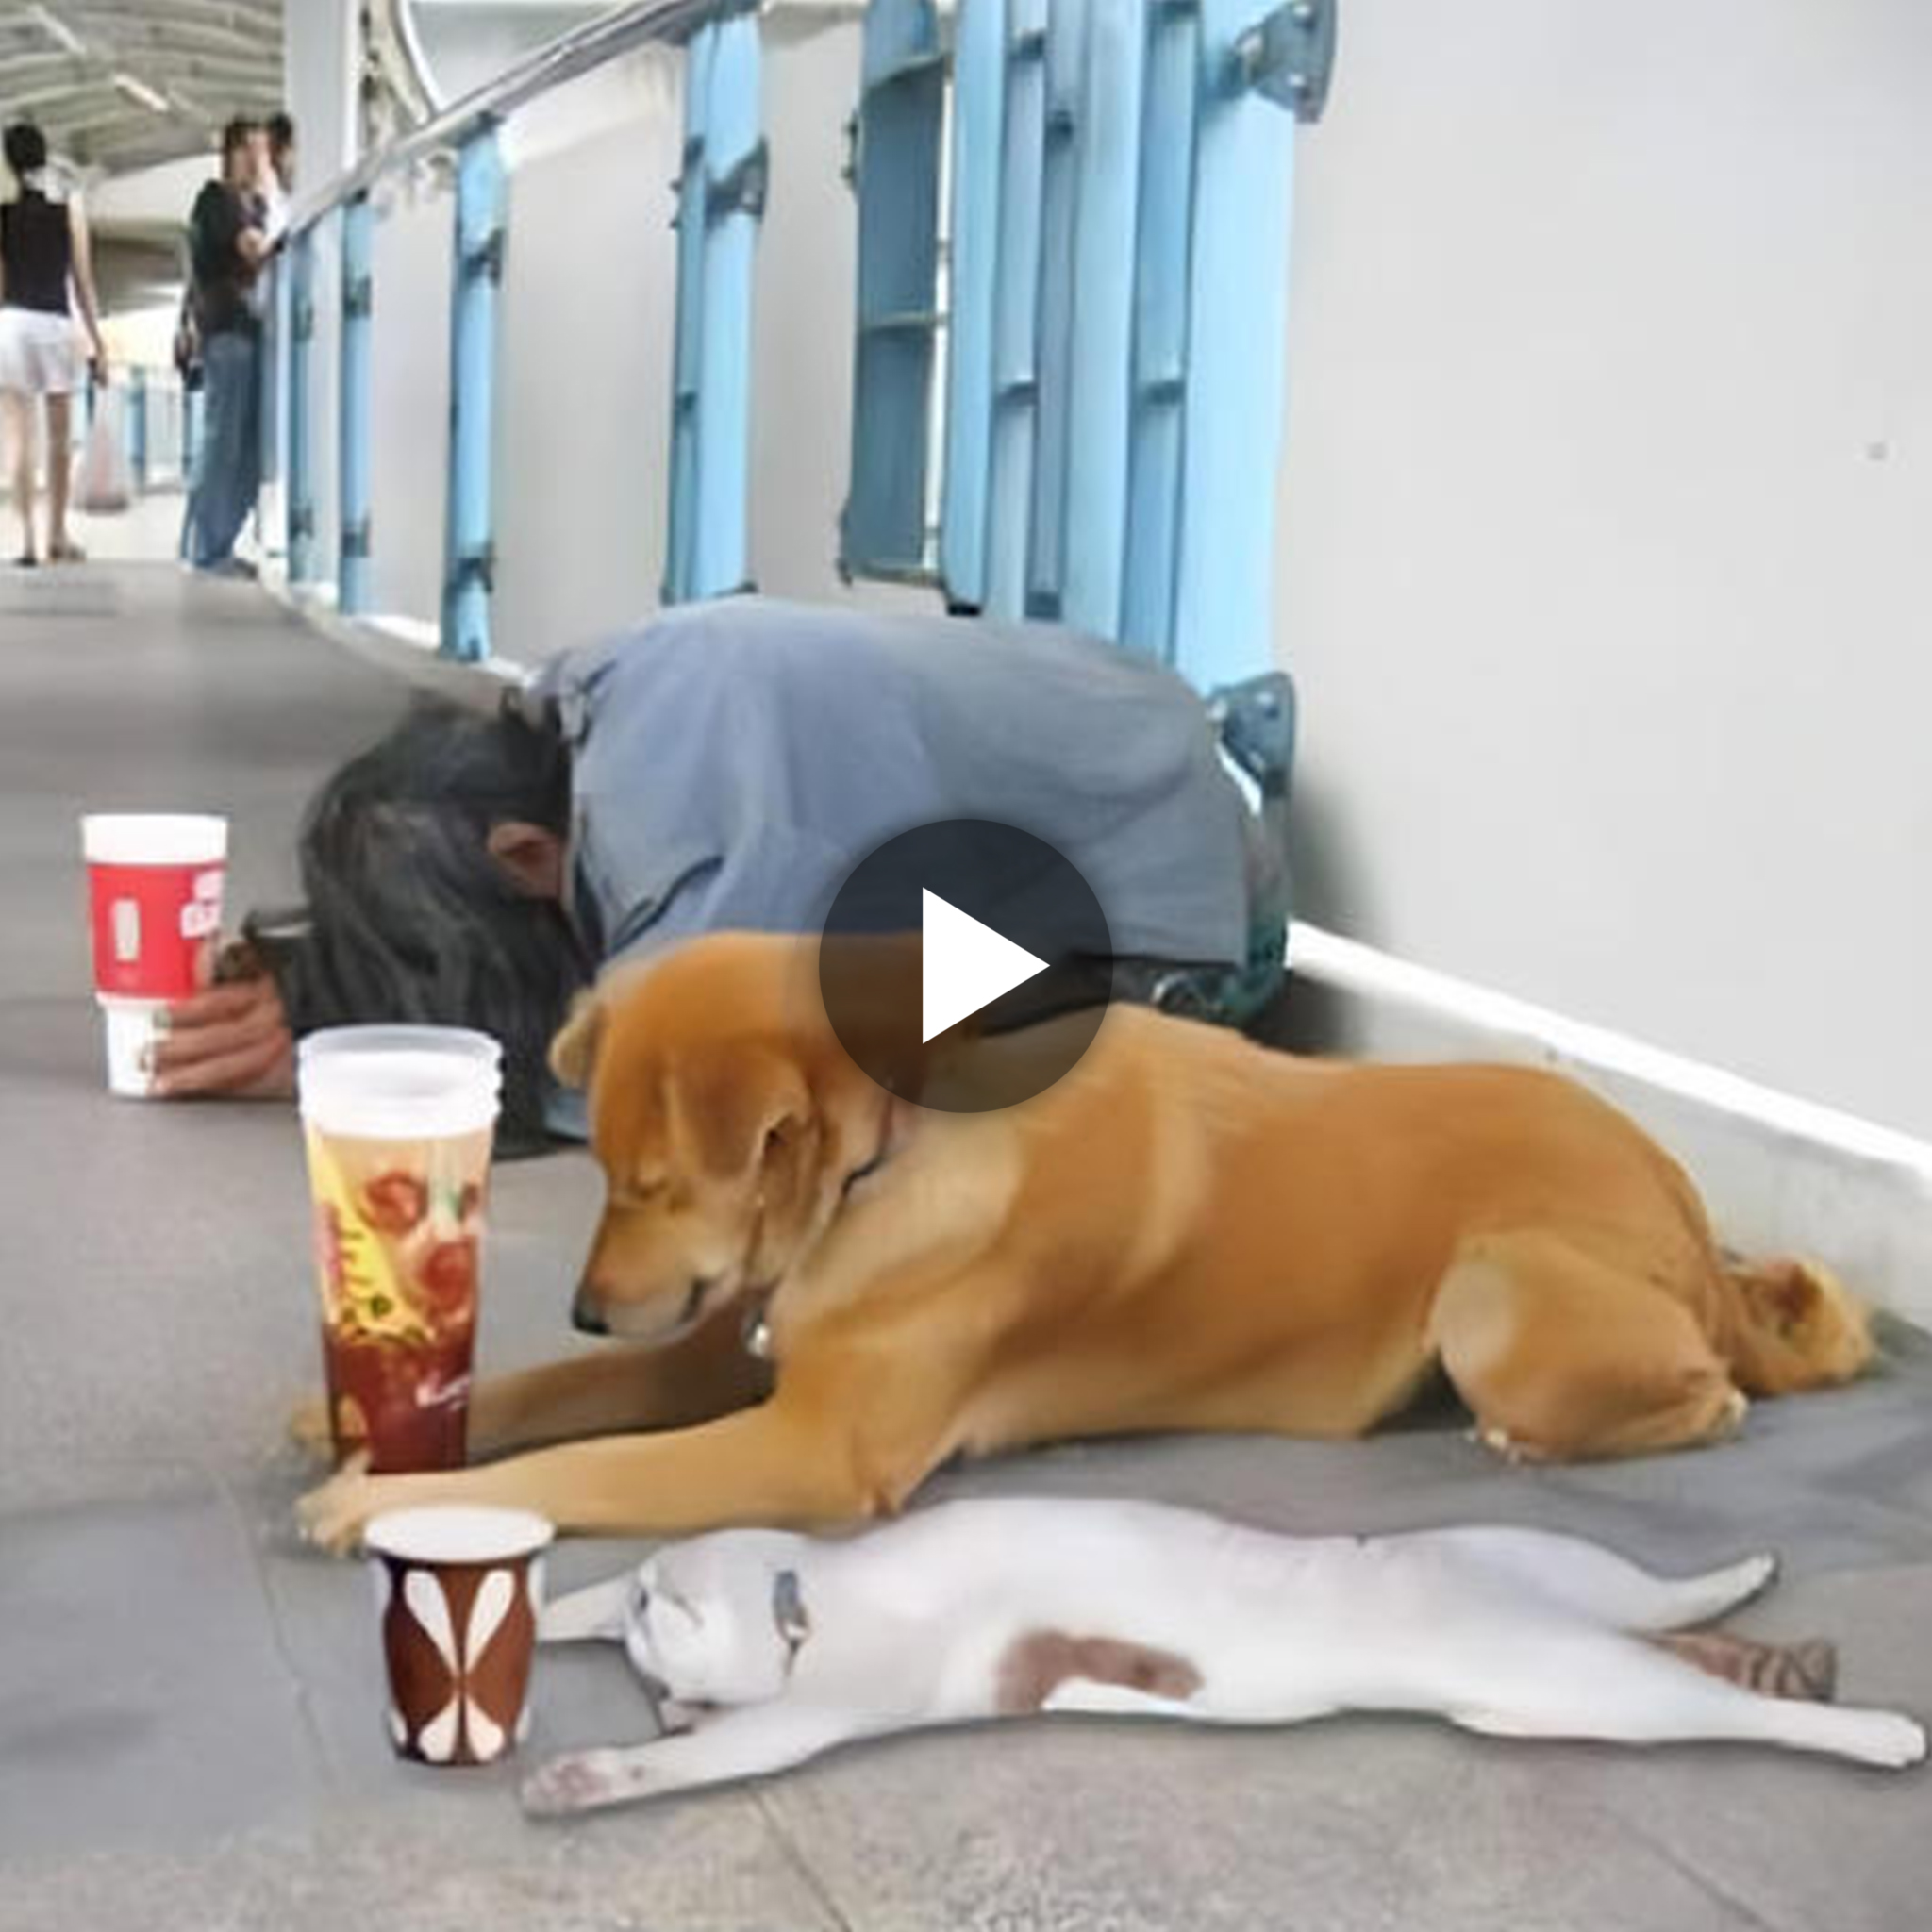 Heartwarming Loyalty: Devoted Dog Kneels Beside Homeless Owner, Touching Millions with Silent Plea for Help and Bringing Tears to Their Eyes